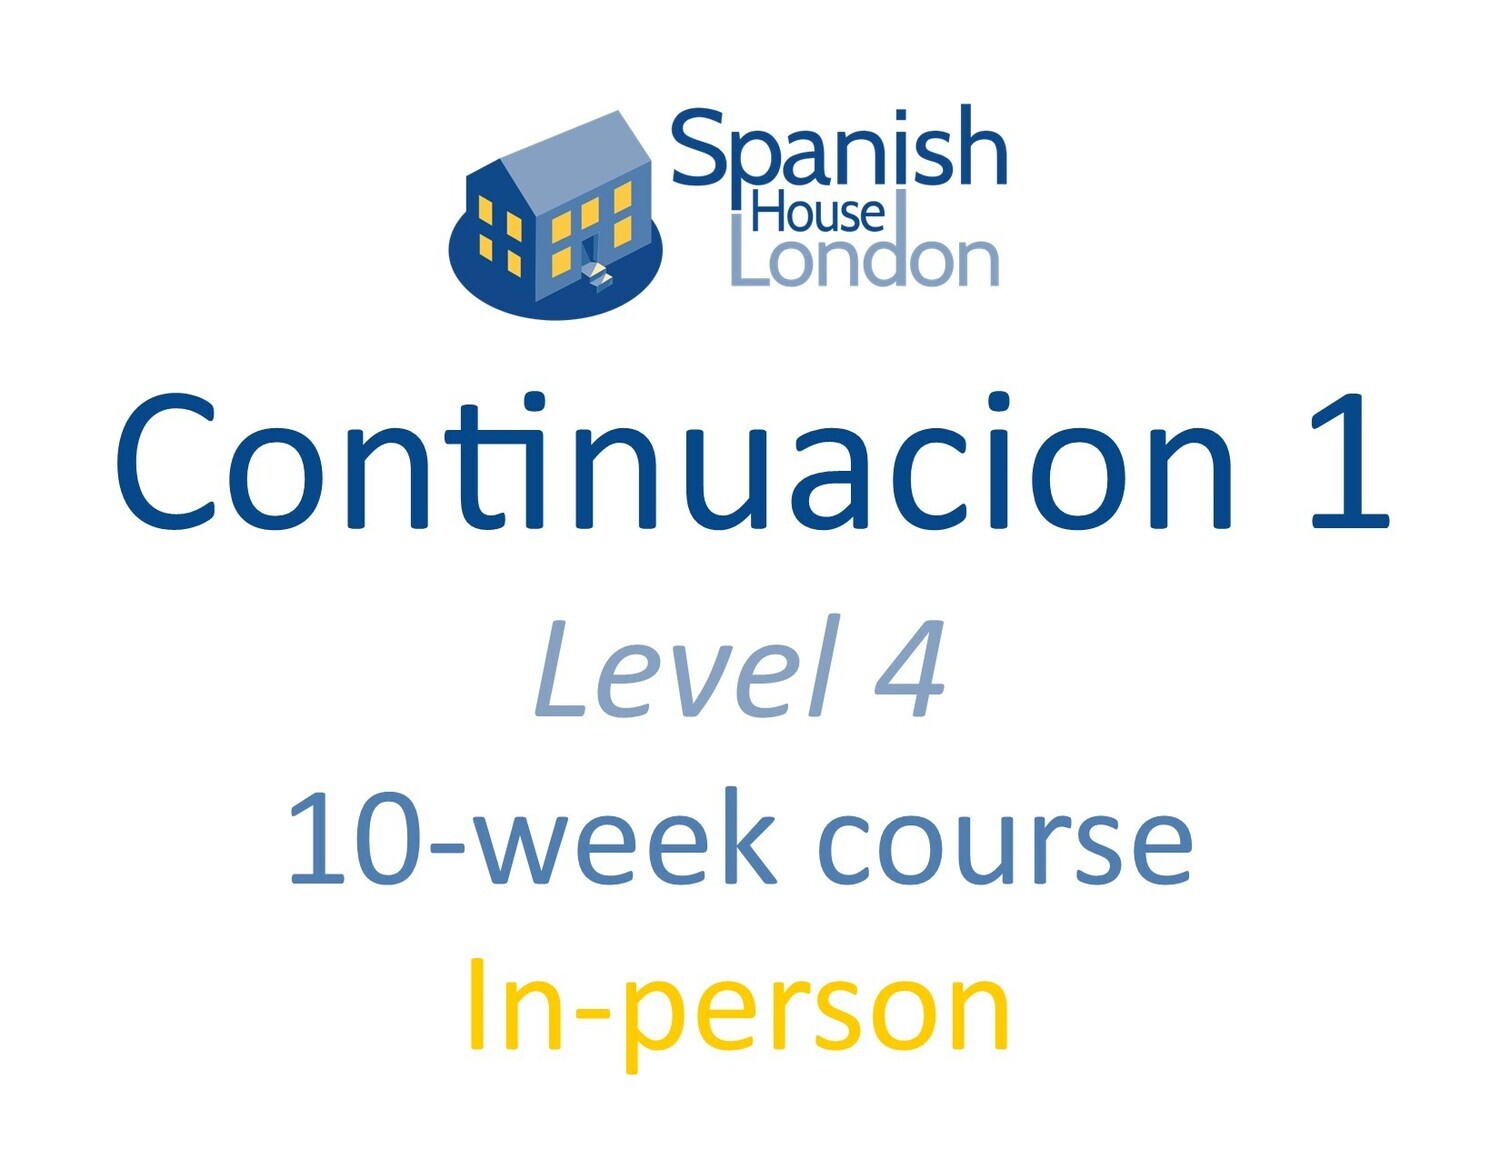 Continuacion 1 Course starting on 19th January at 7.30pm in Euston / King's Cross